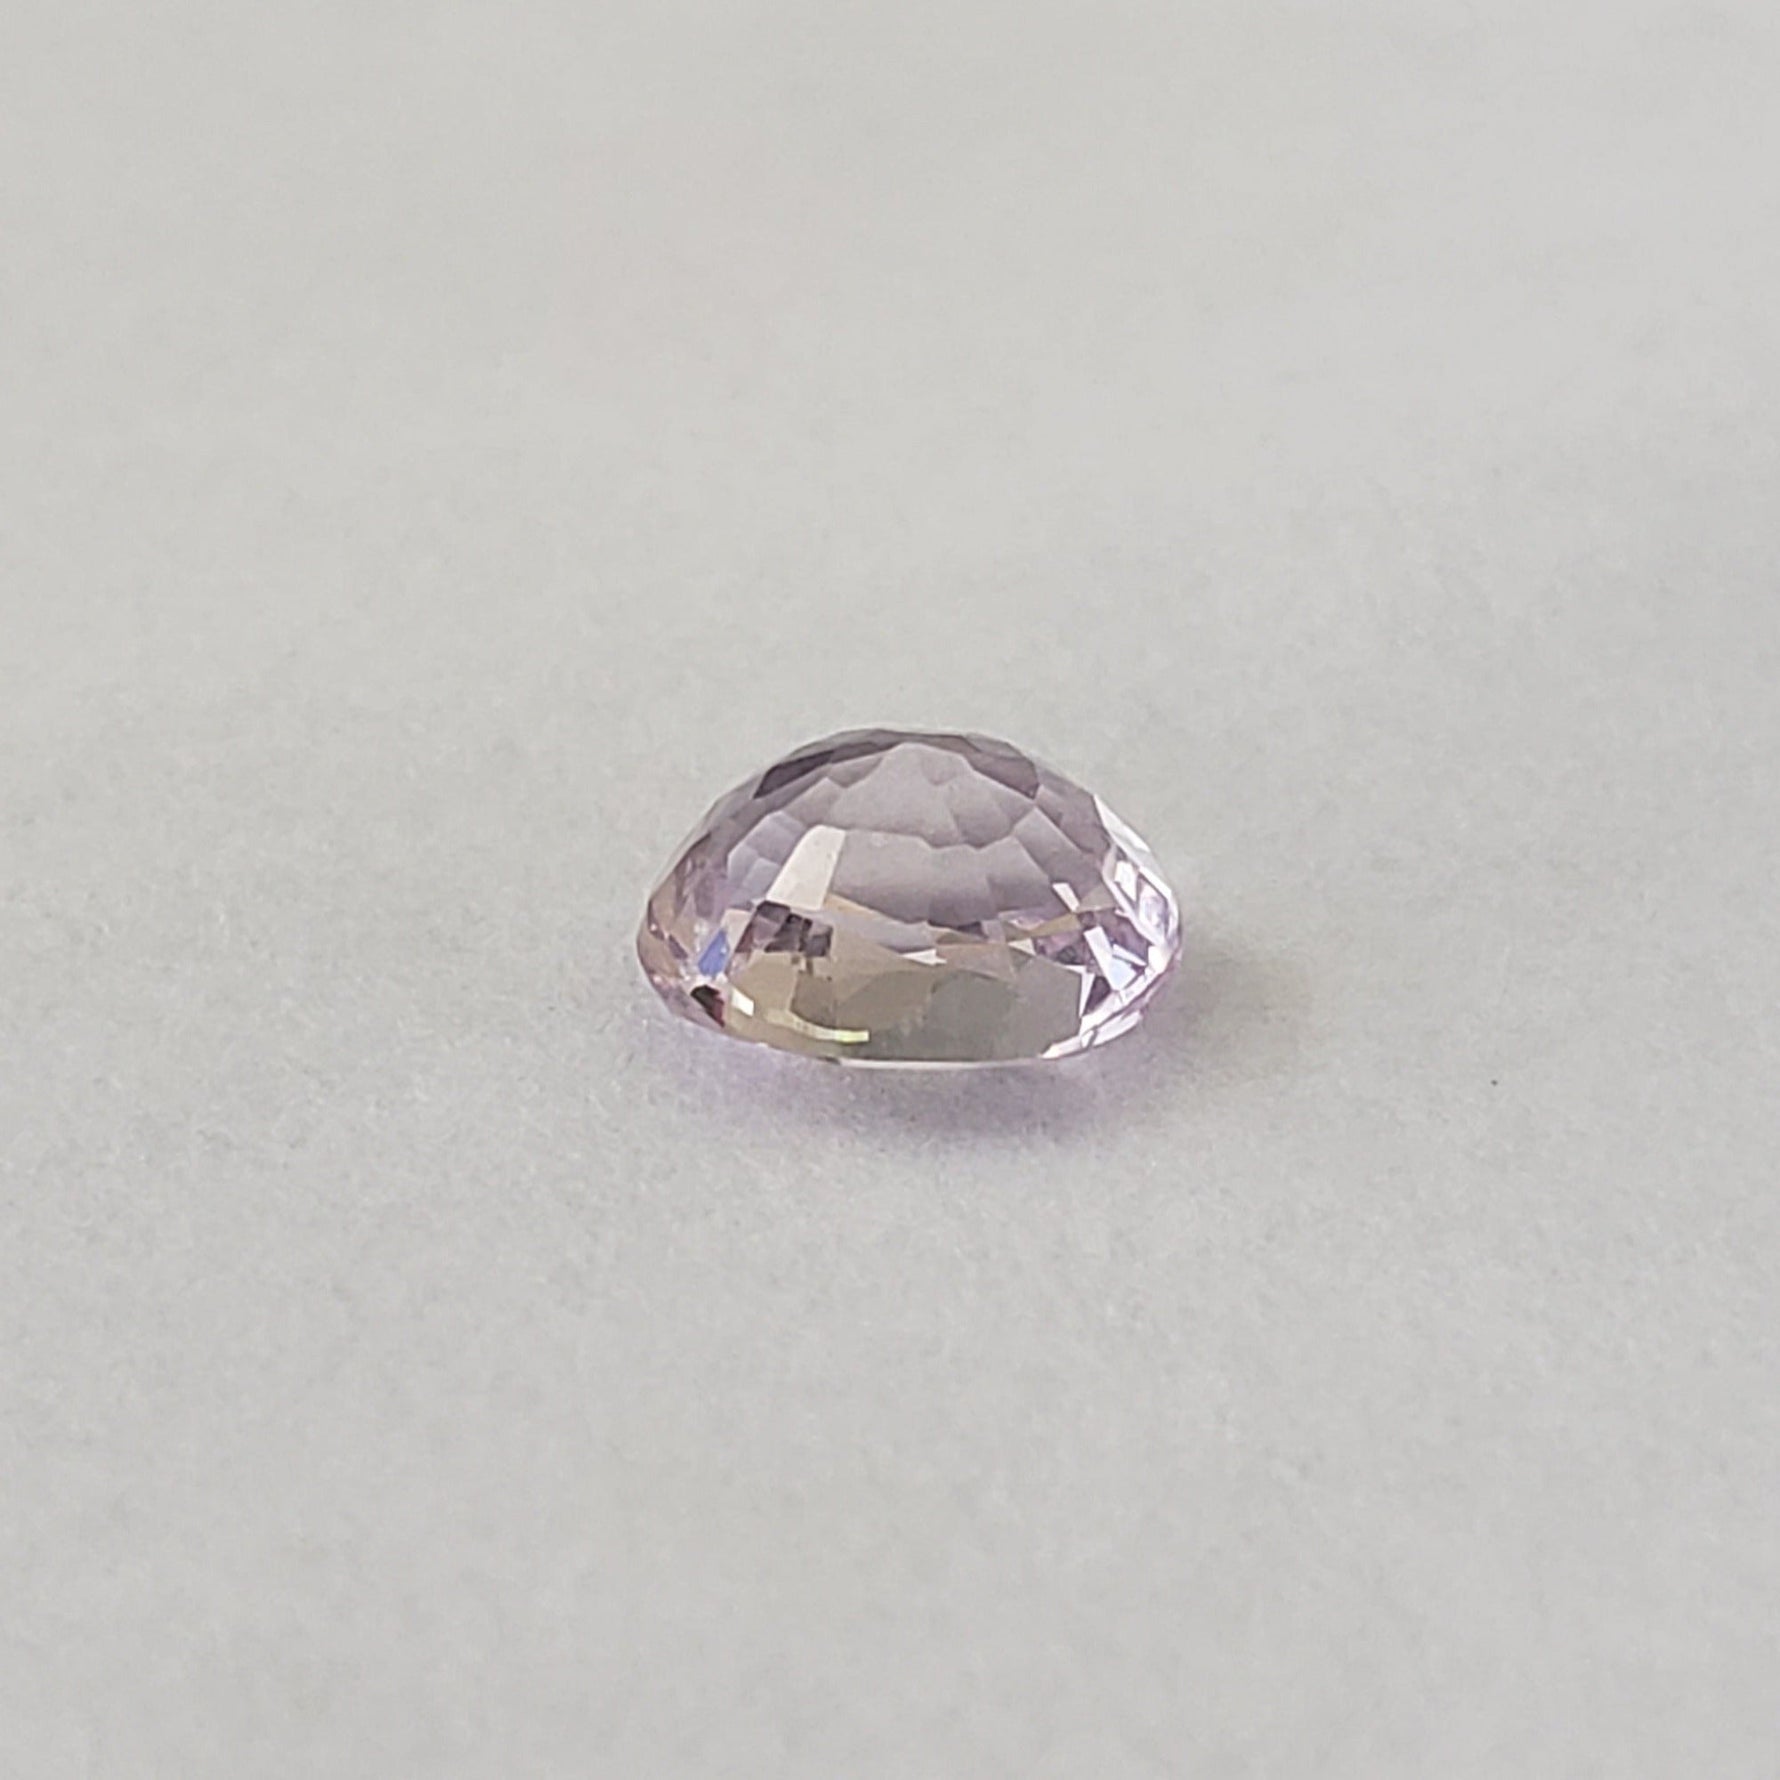 Spinel | Oval Cut | Purple Pink | Natural | 6.7x5.5mm | Myanmar